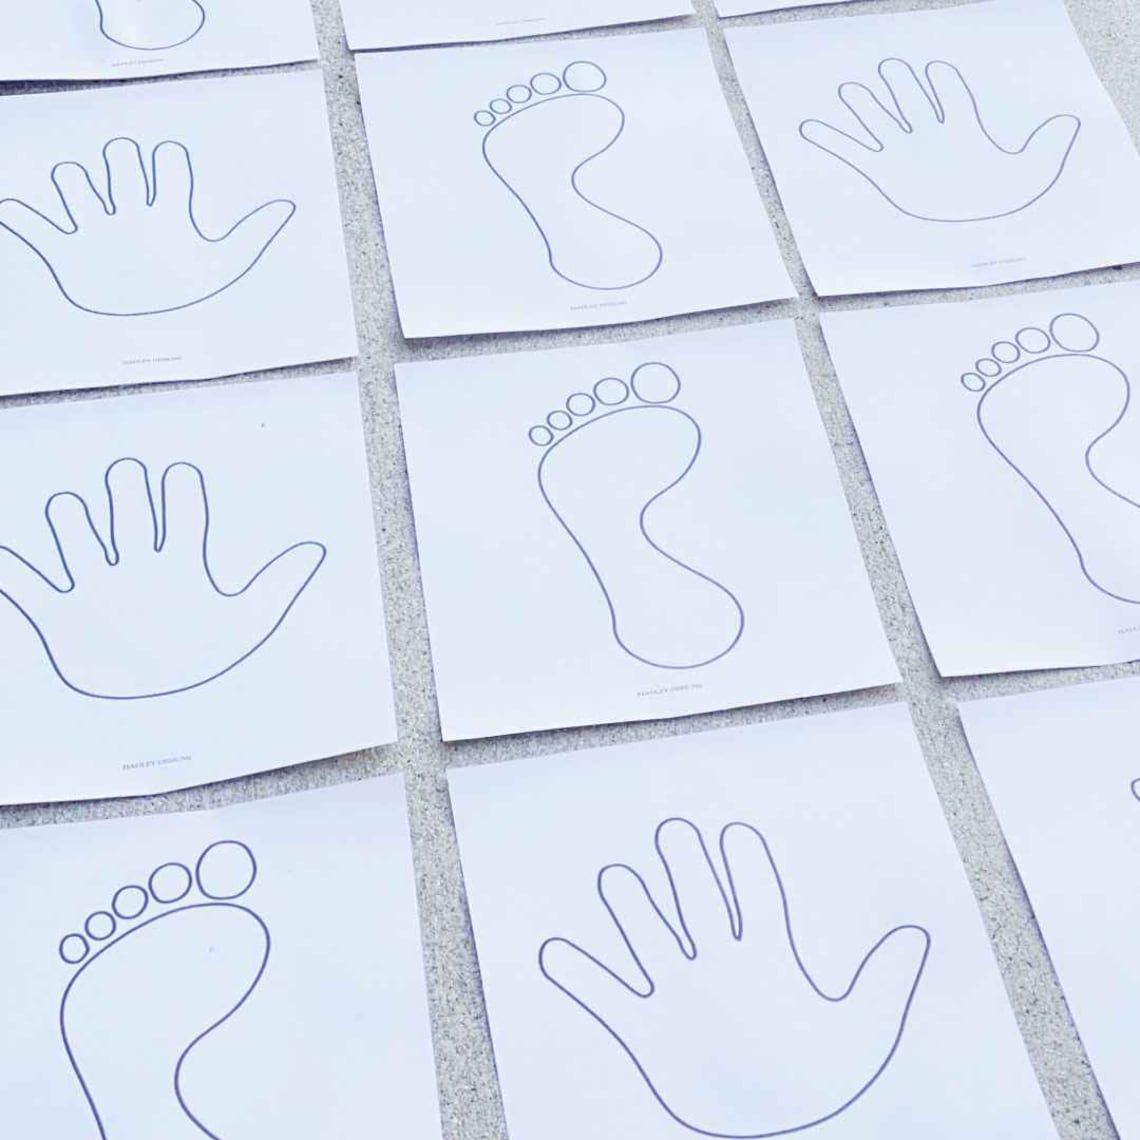 printable-hopscotch-hands-and-feet-game-kids-learning-etsy